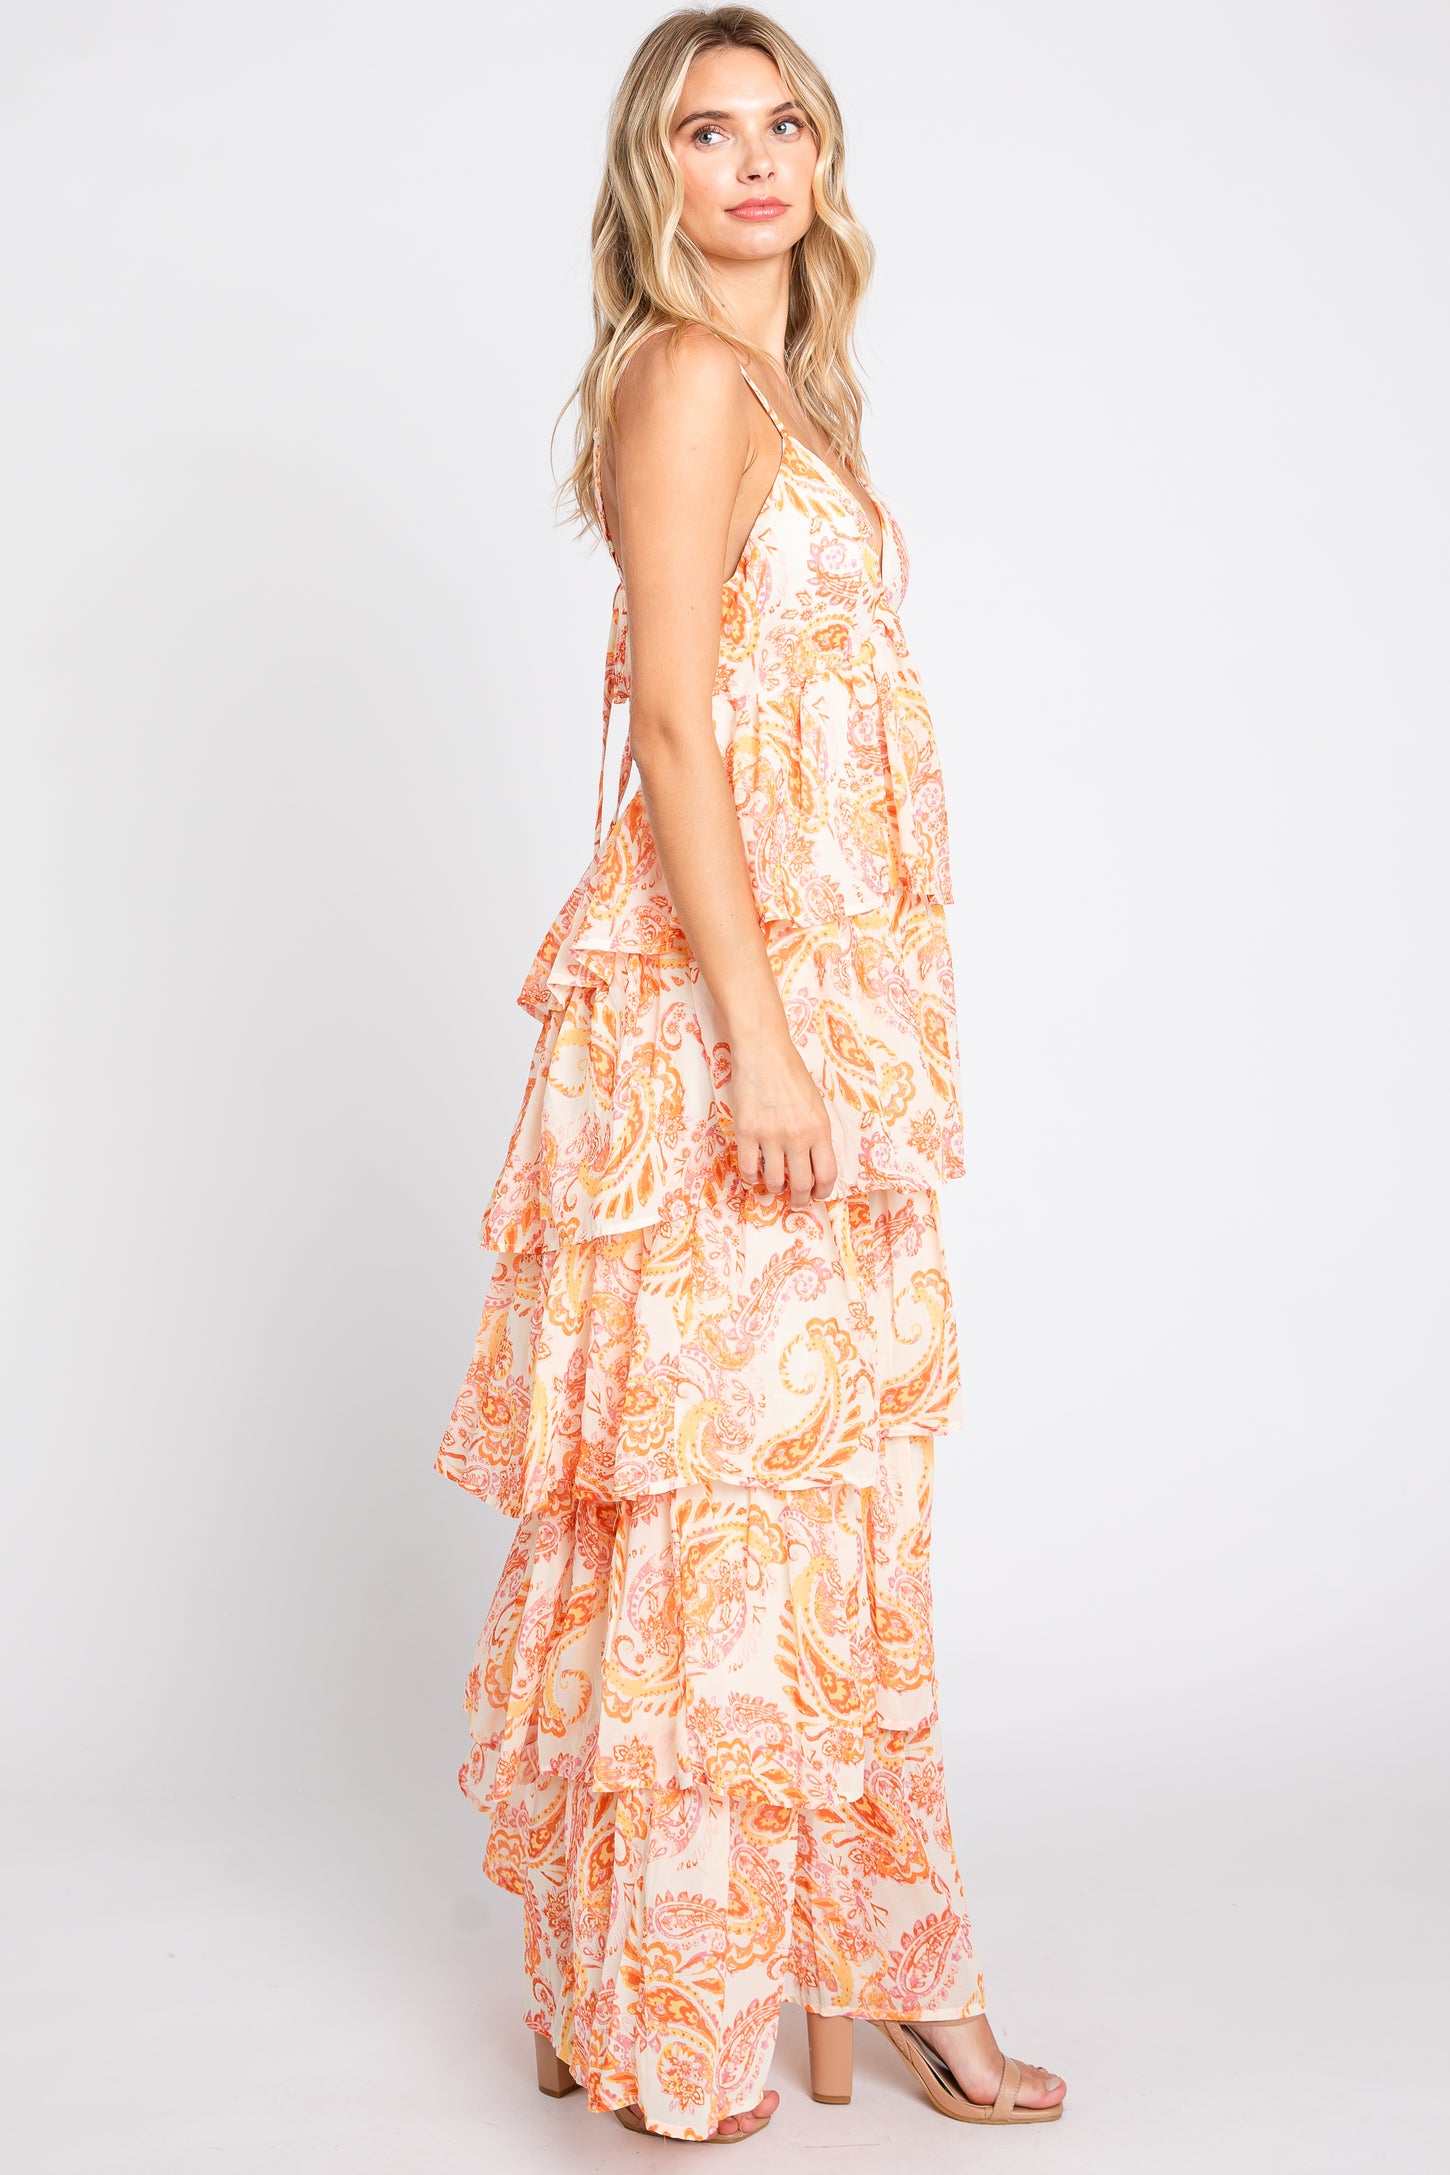 Ivory Floral Chiffon Open Back Tiered Maxi Dress